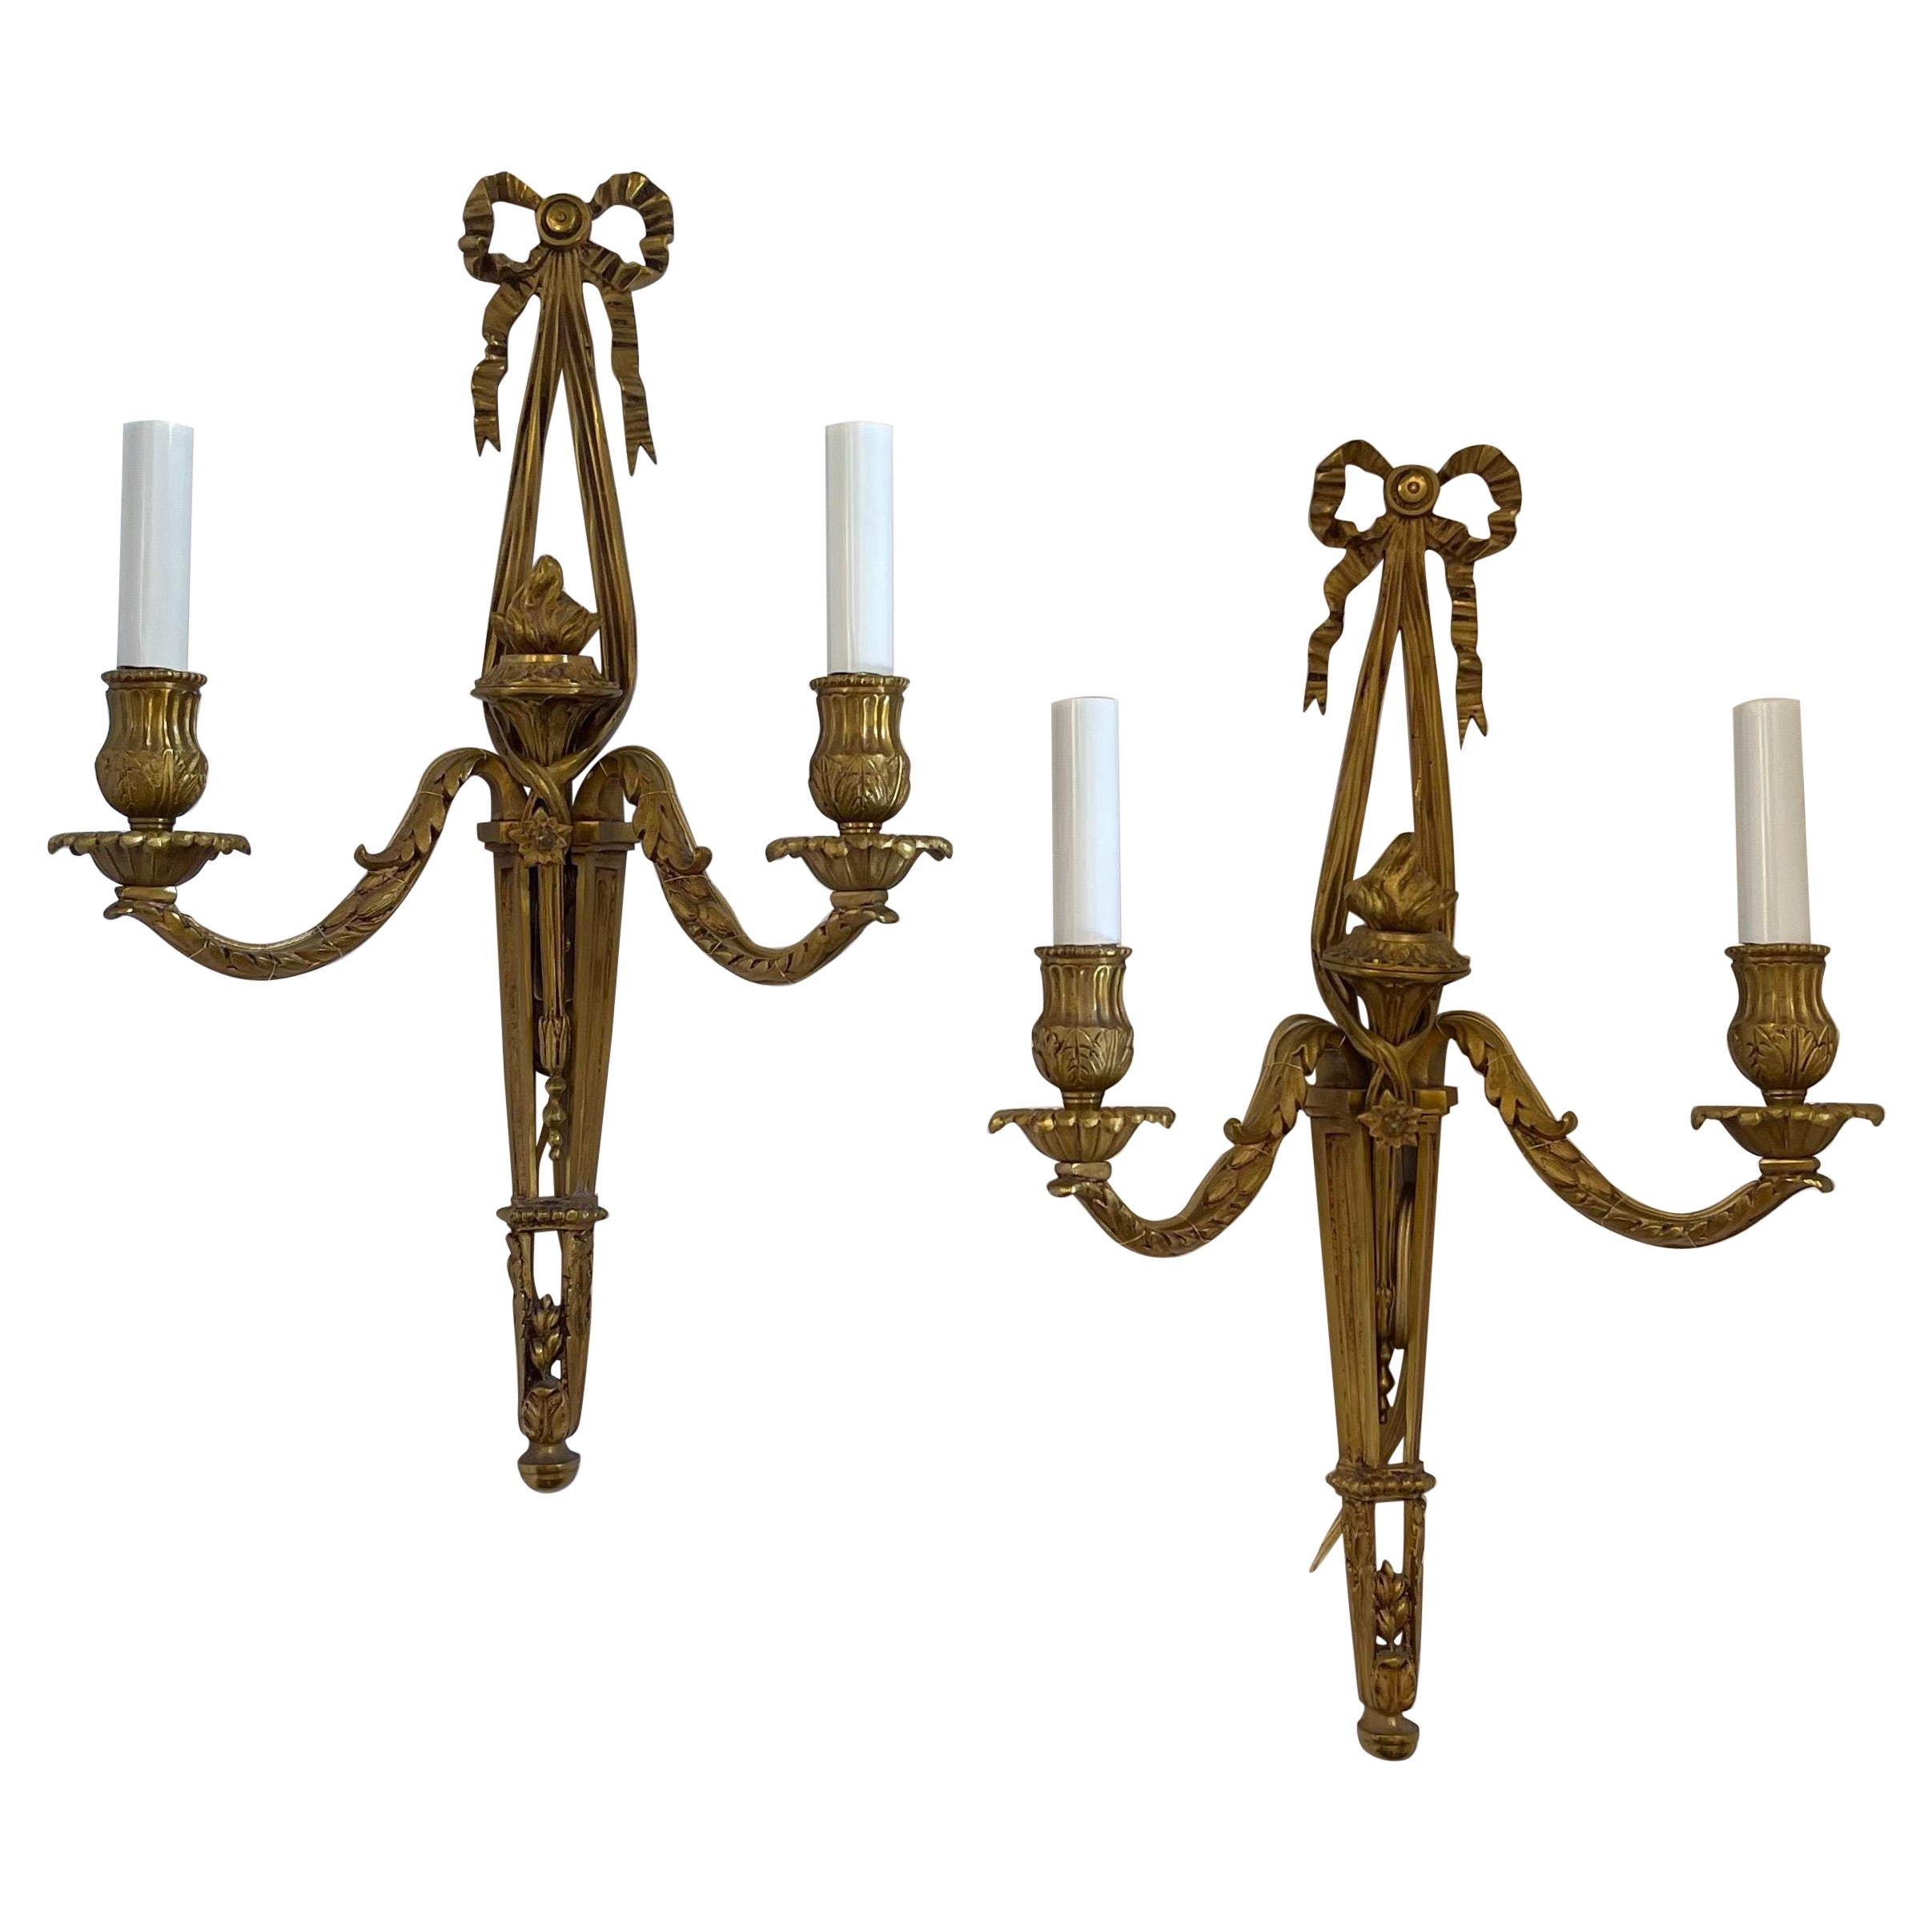 Wonderful Pair French Dore Bronze Ribbon Top Torchiere Neoclassical Sconces For Sale